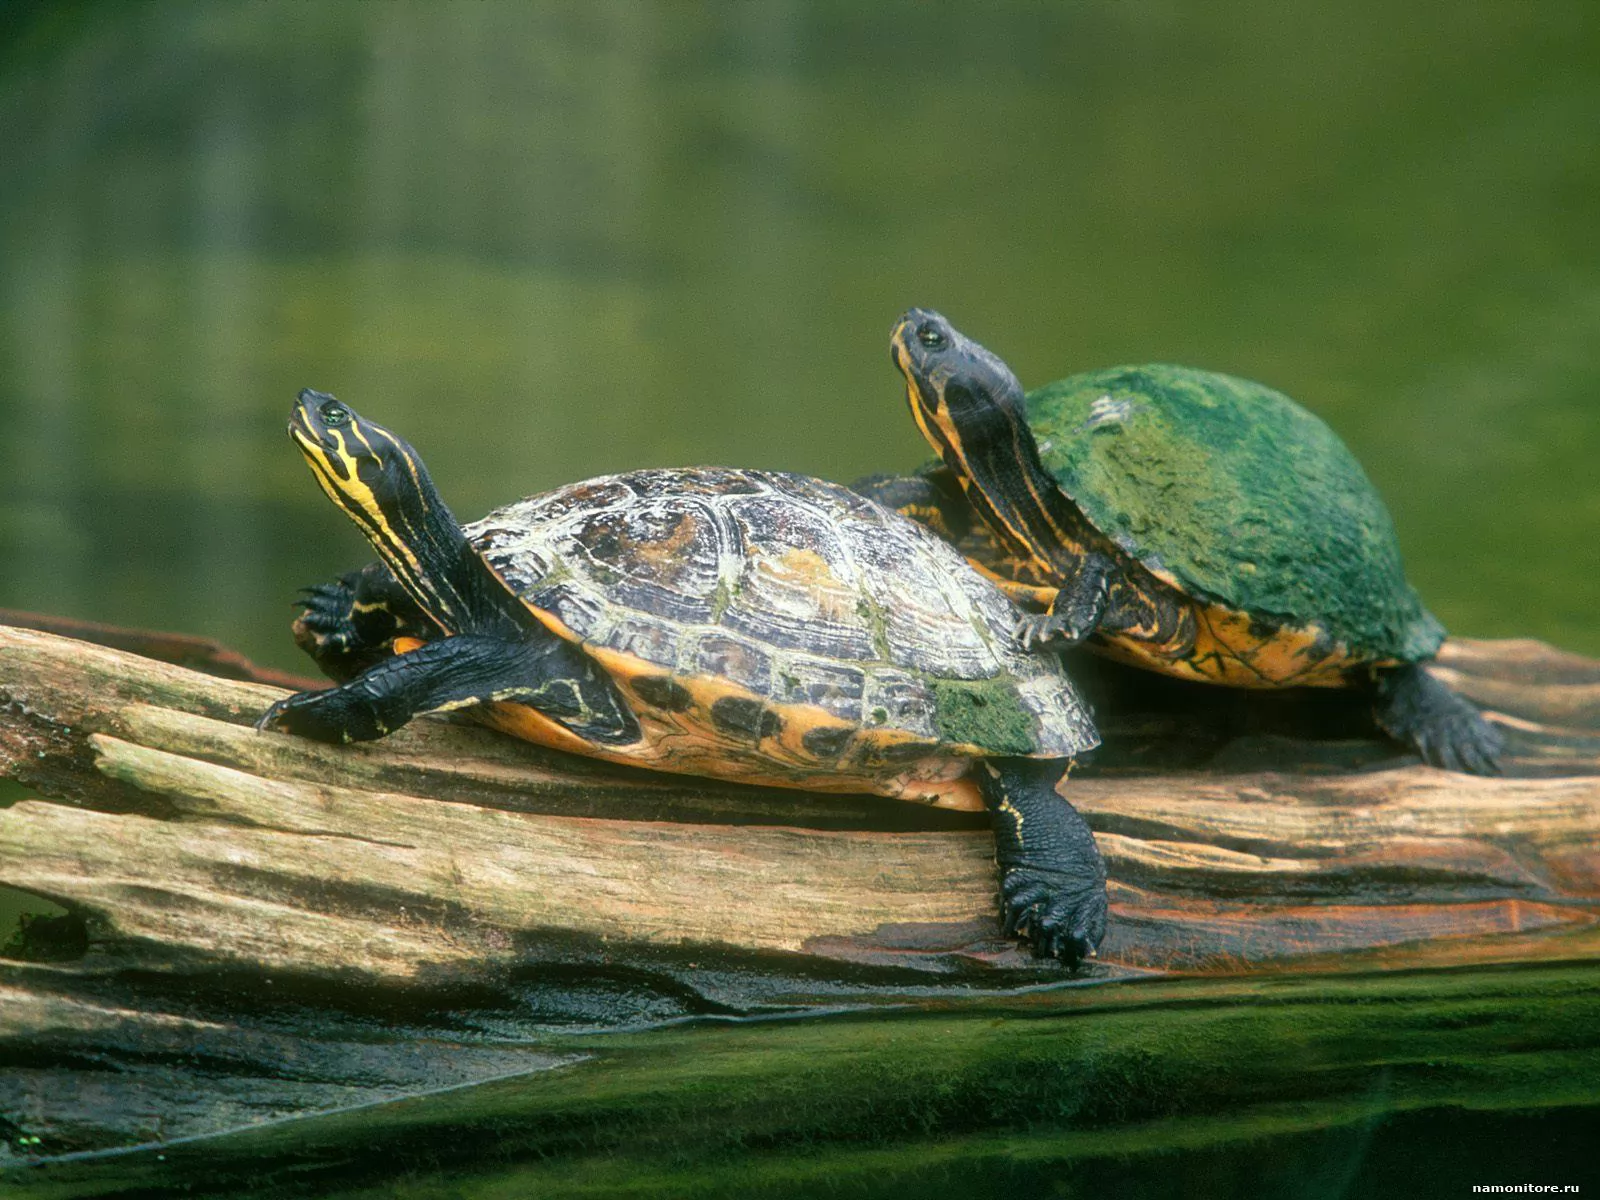 Two turtles on a log, enamoured, green, turtles x